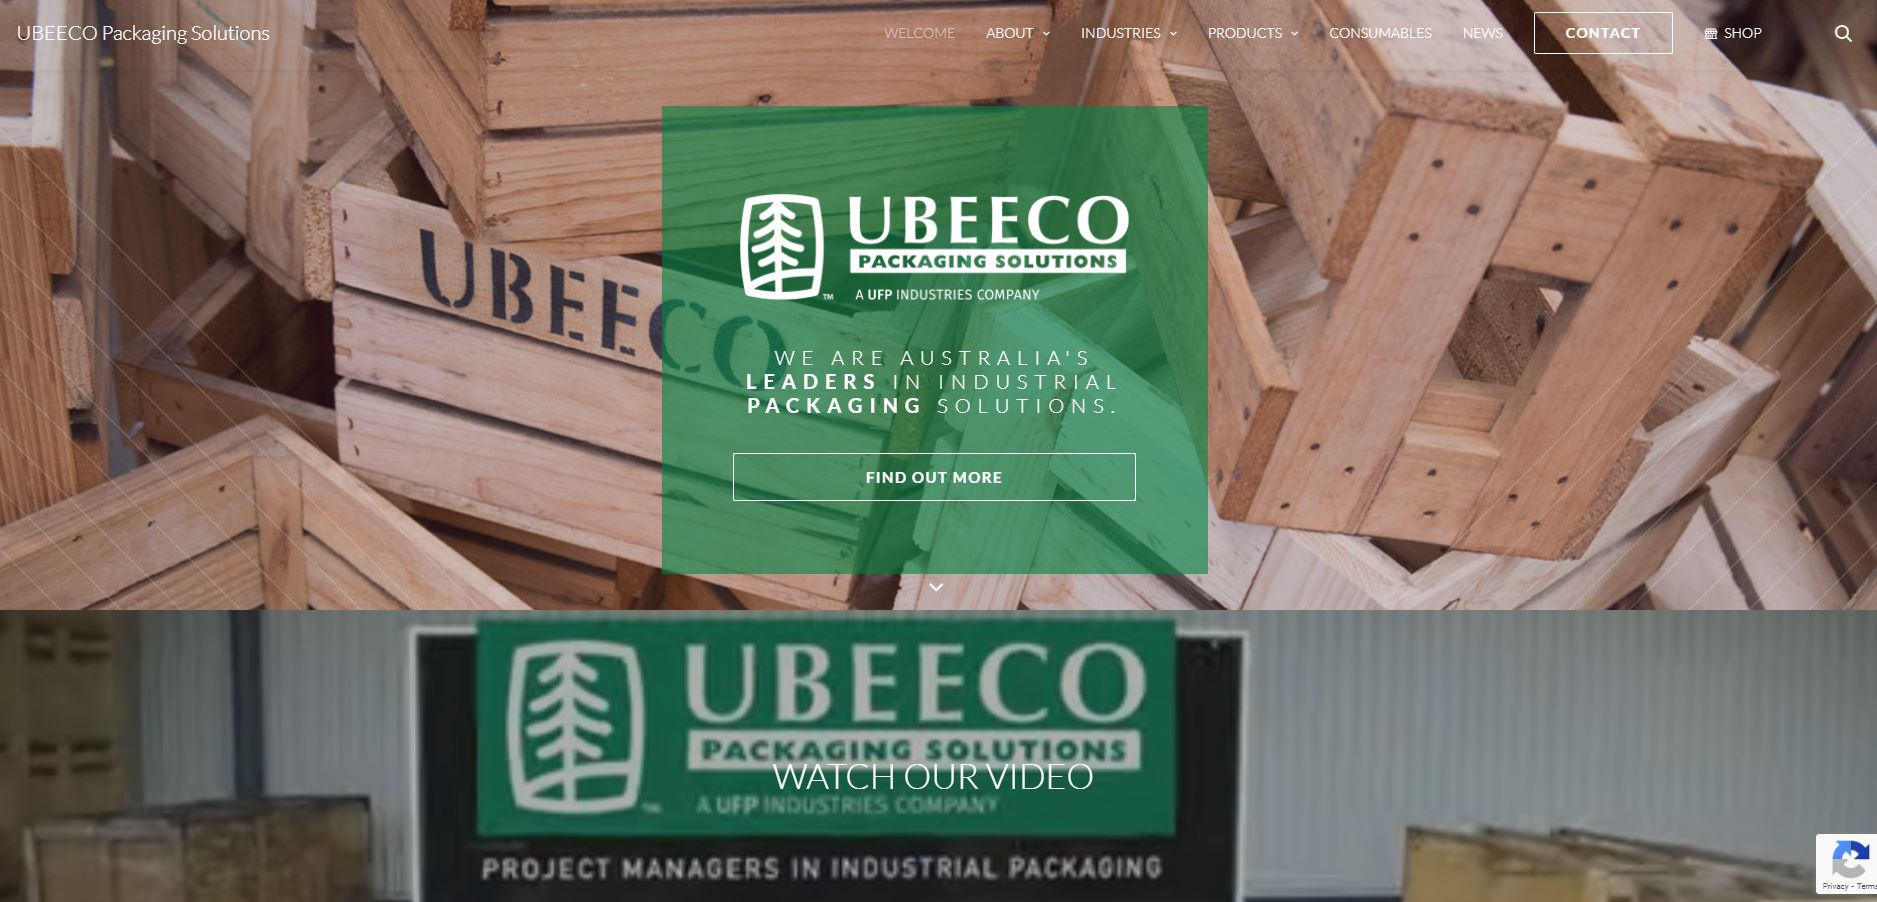 ubeeco packaging solutions